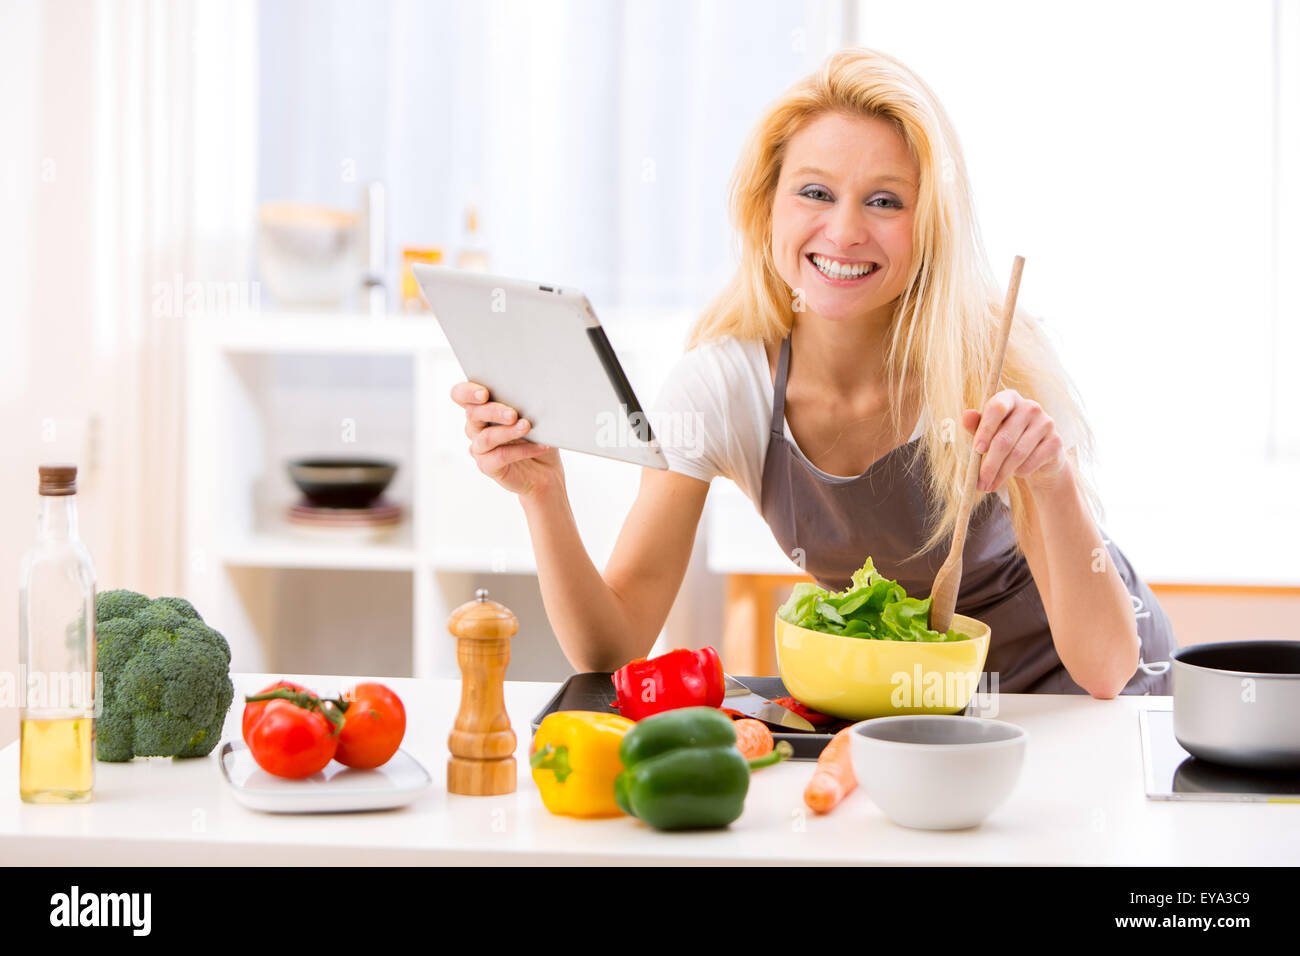 View of a Young attractive woman cooking in a kitchen Stock Photo